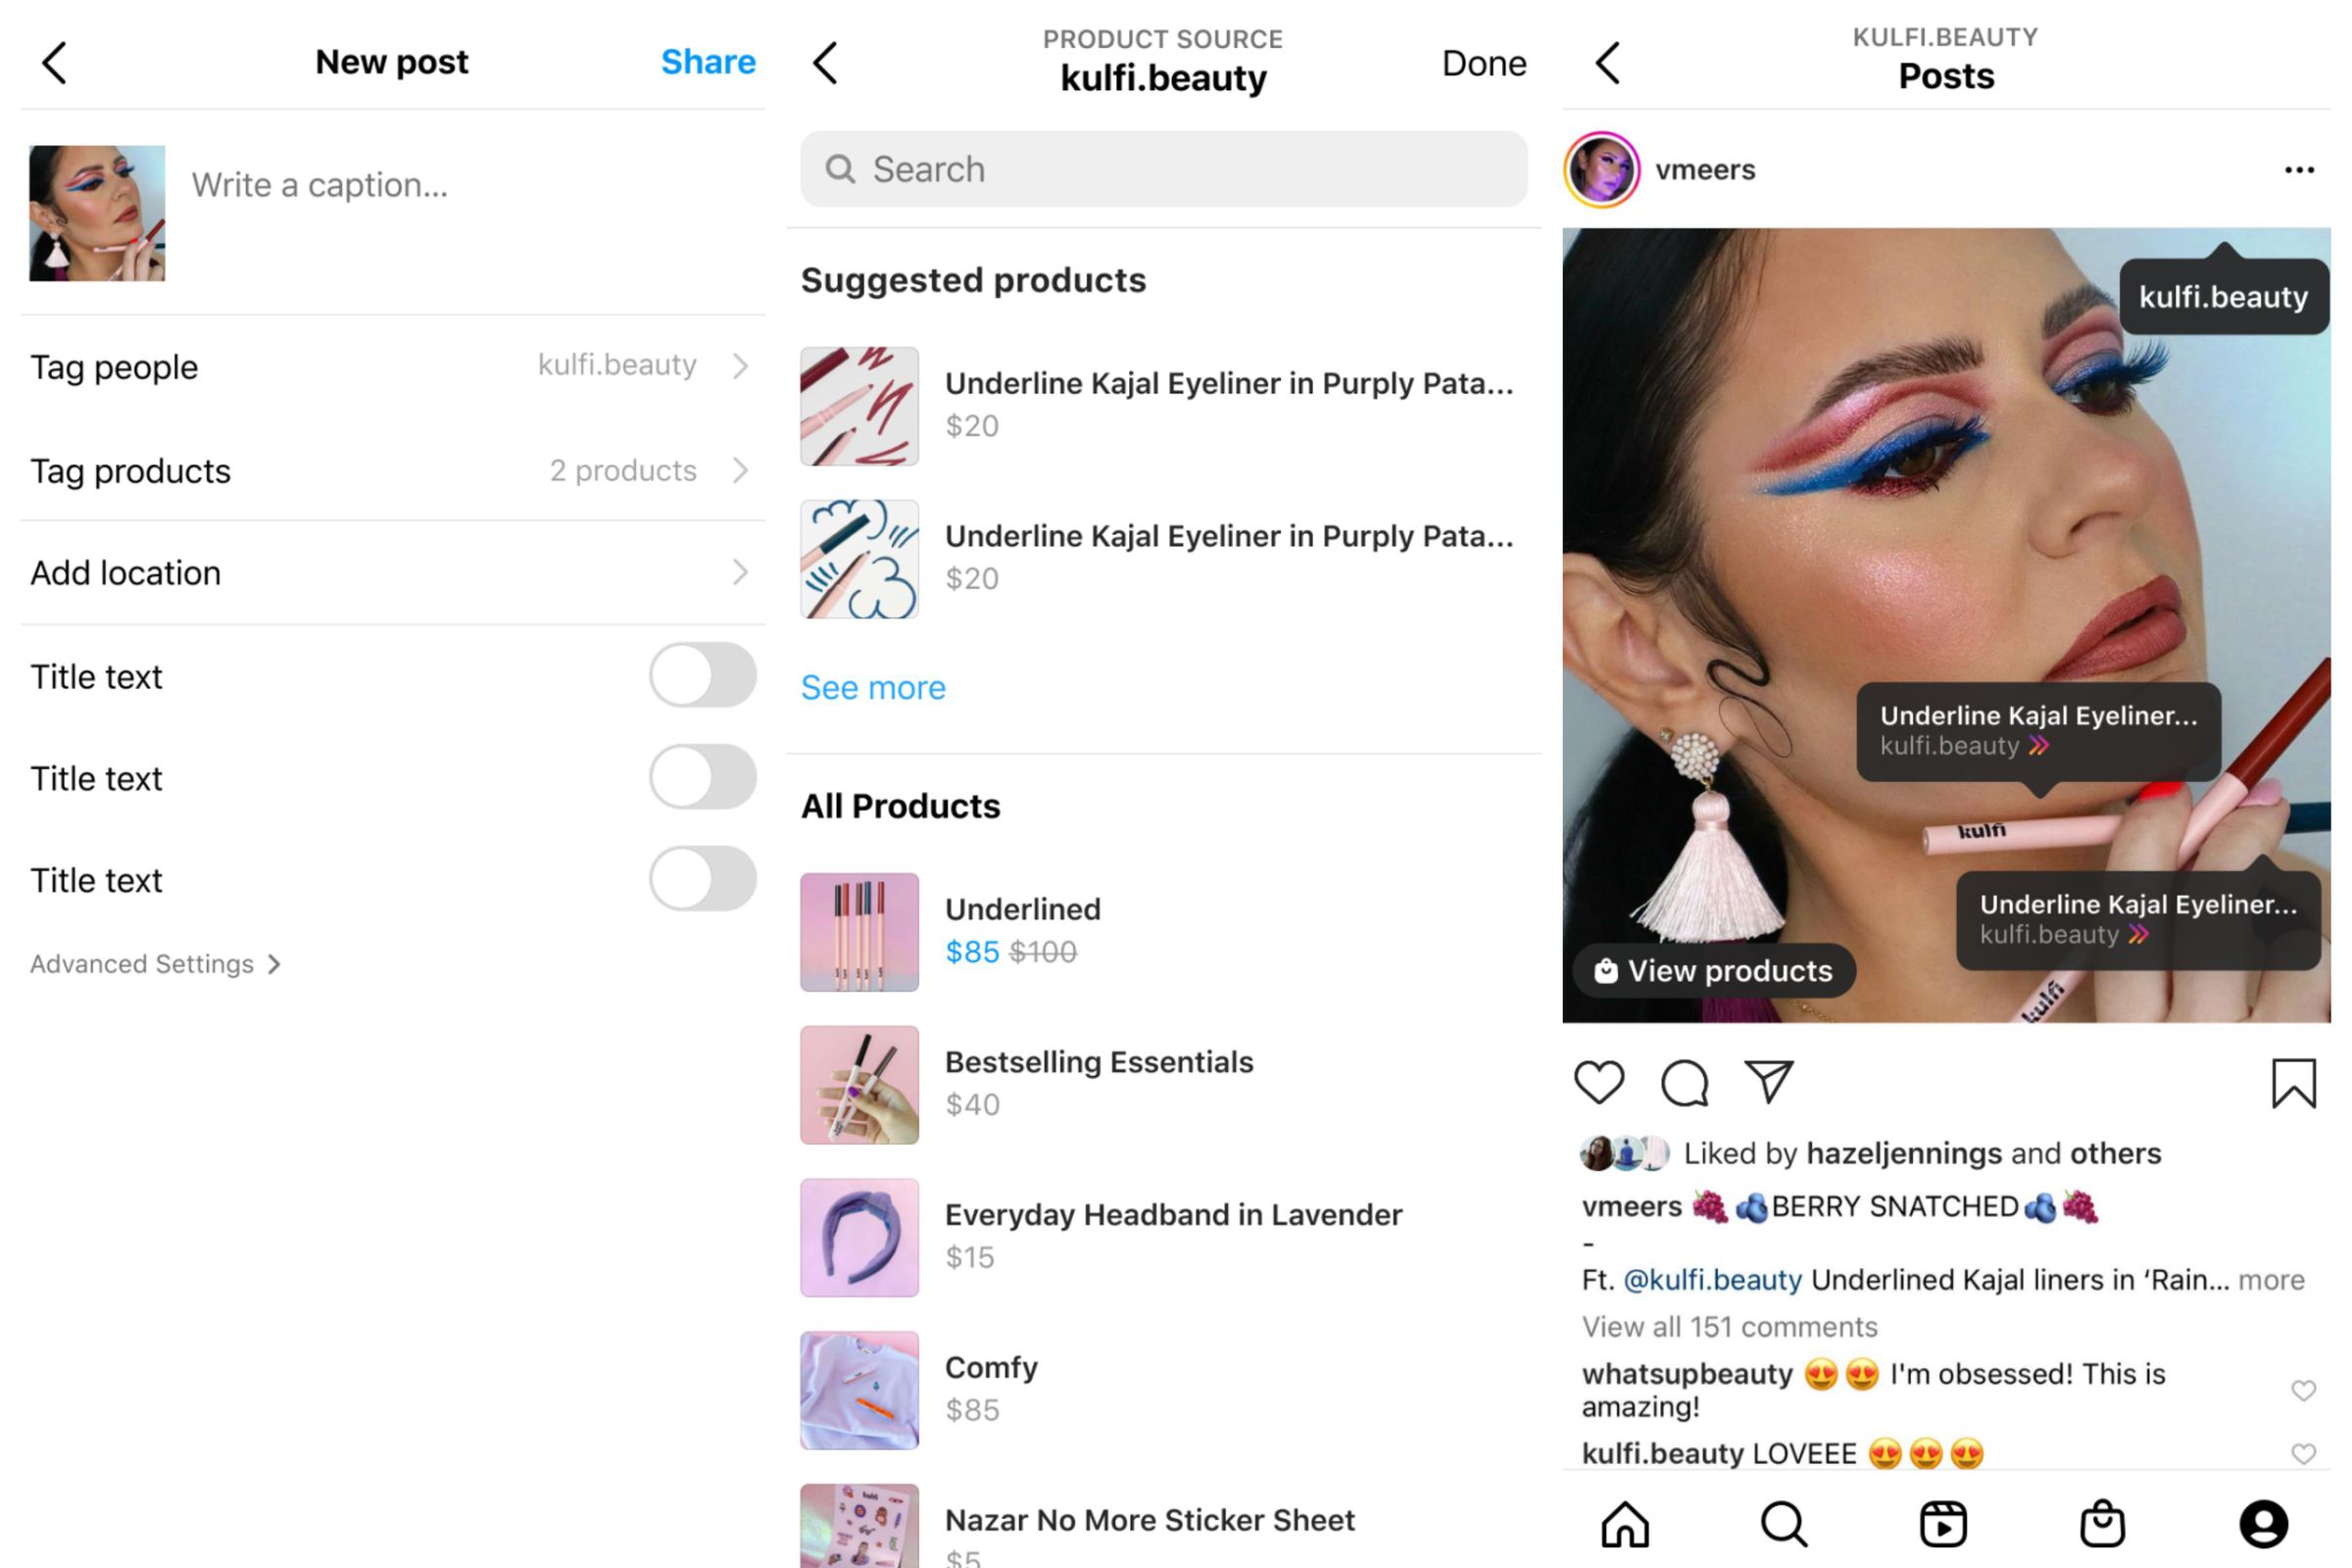 US-based users on Instagram can now tag products in their posts. 